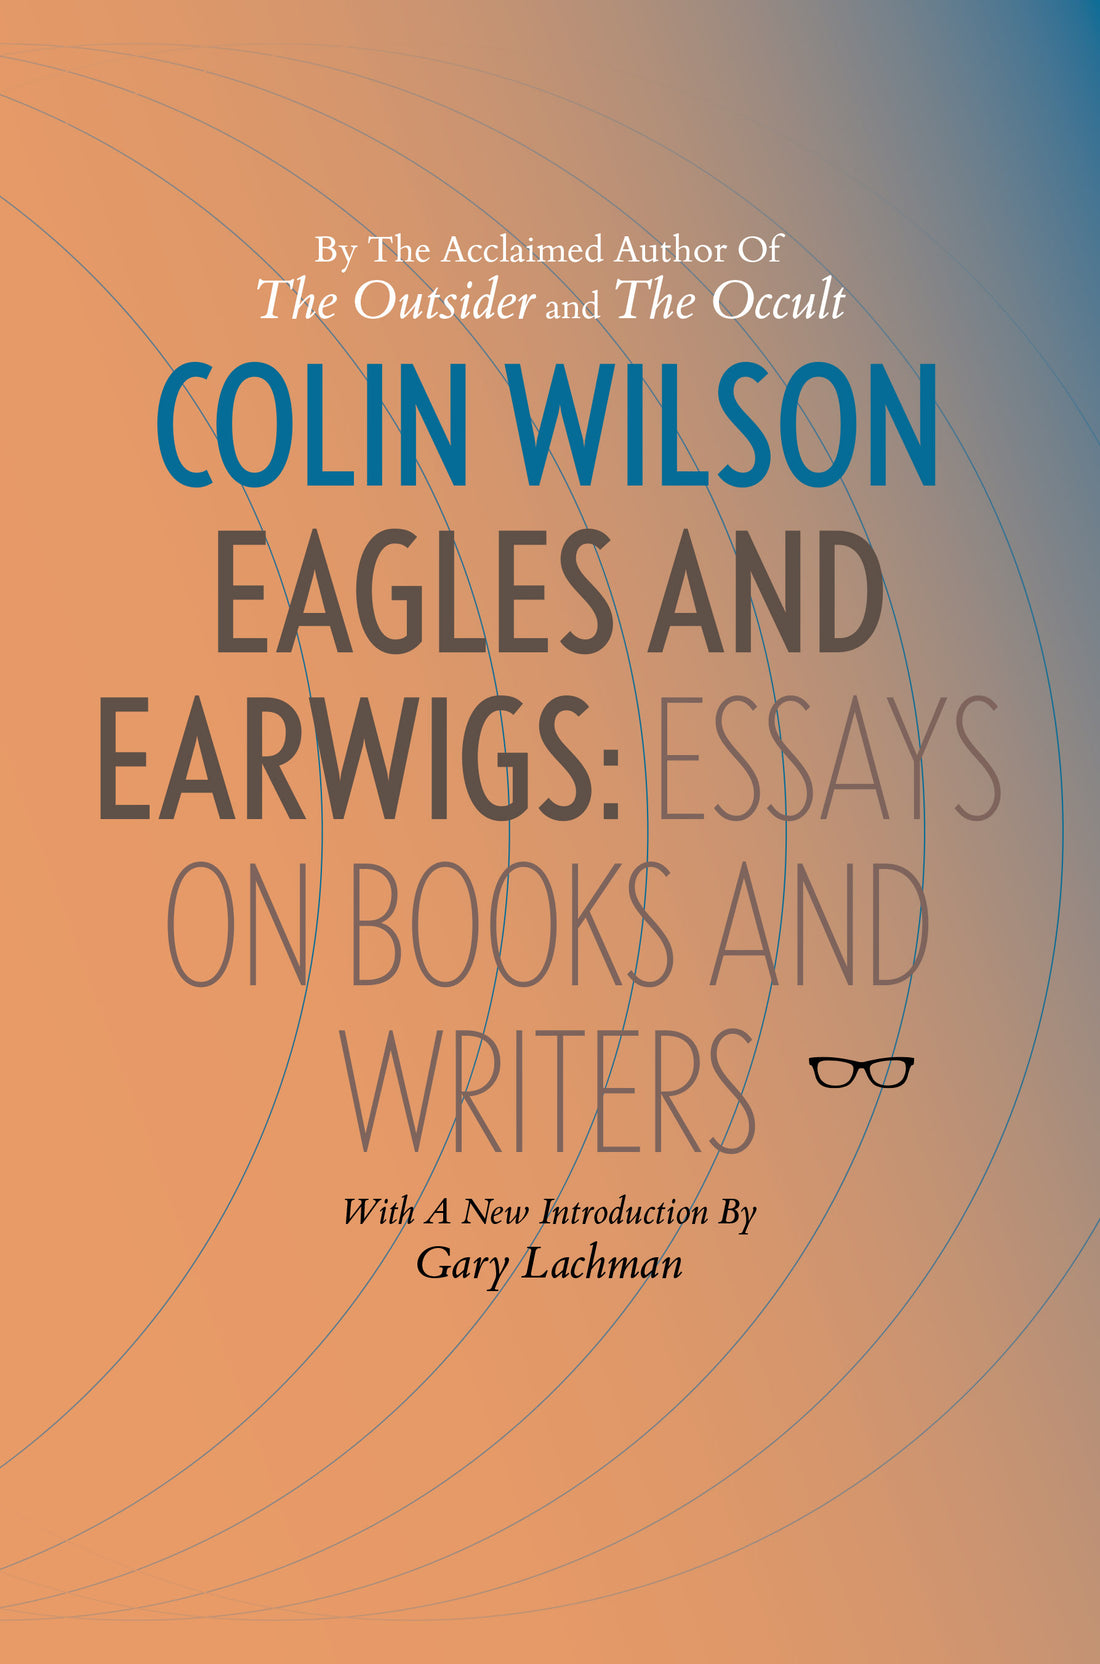 OUR COLIN WILSON BOOK GETS GREAT REVIEW